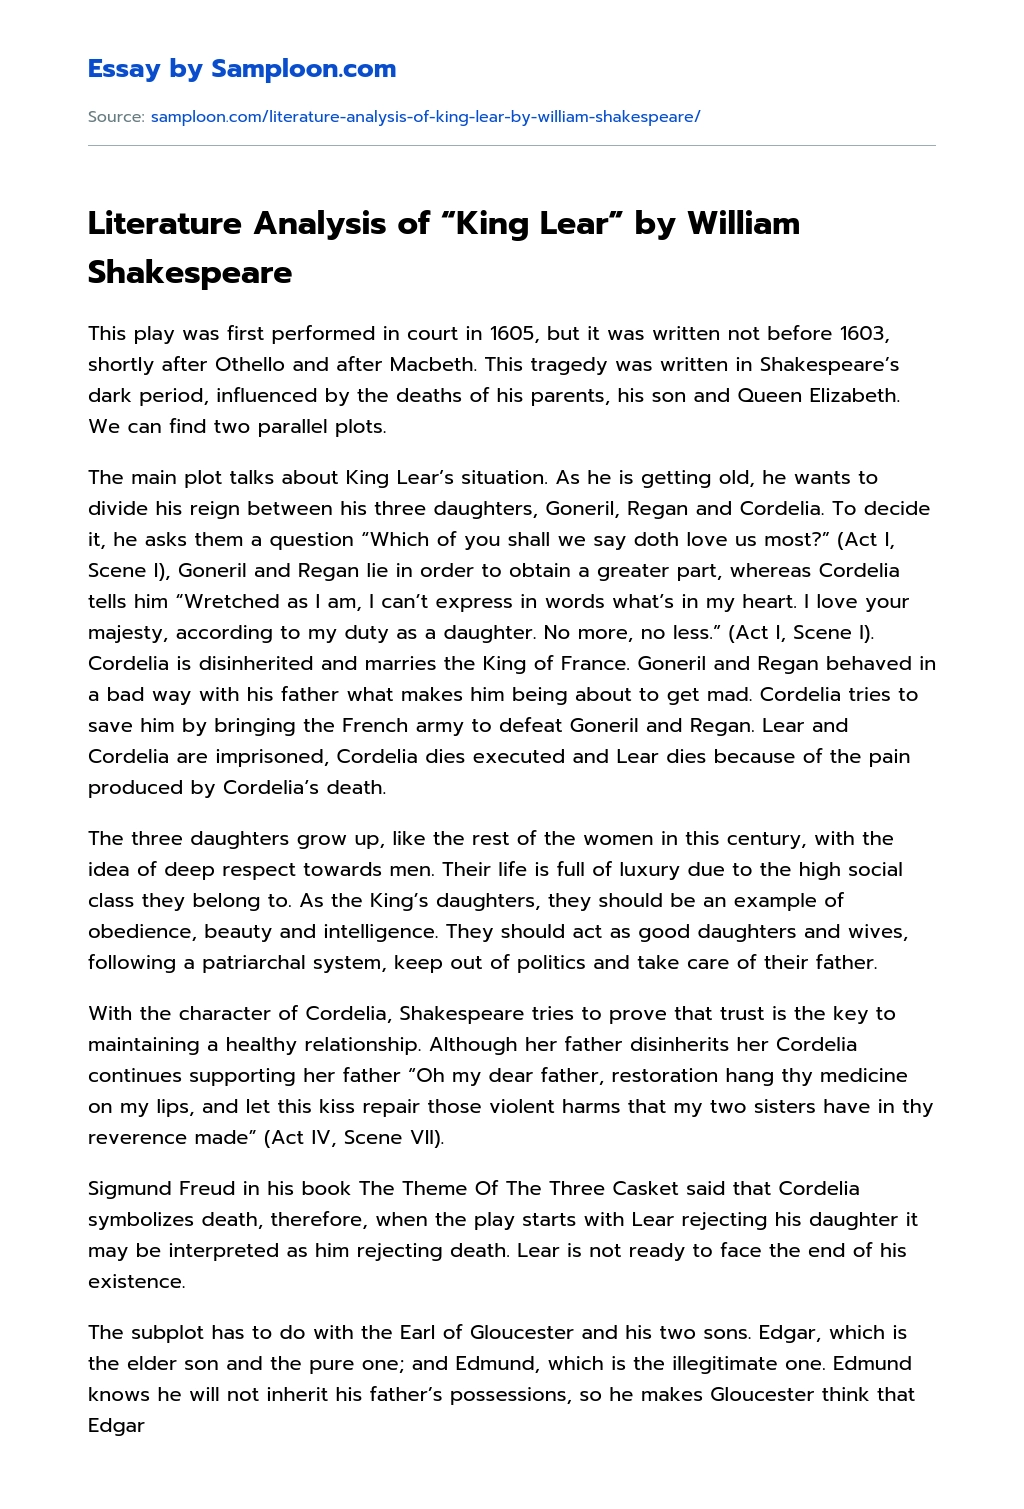 Literature Analysis of “King Lear” by William Shakespeare essay